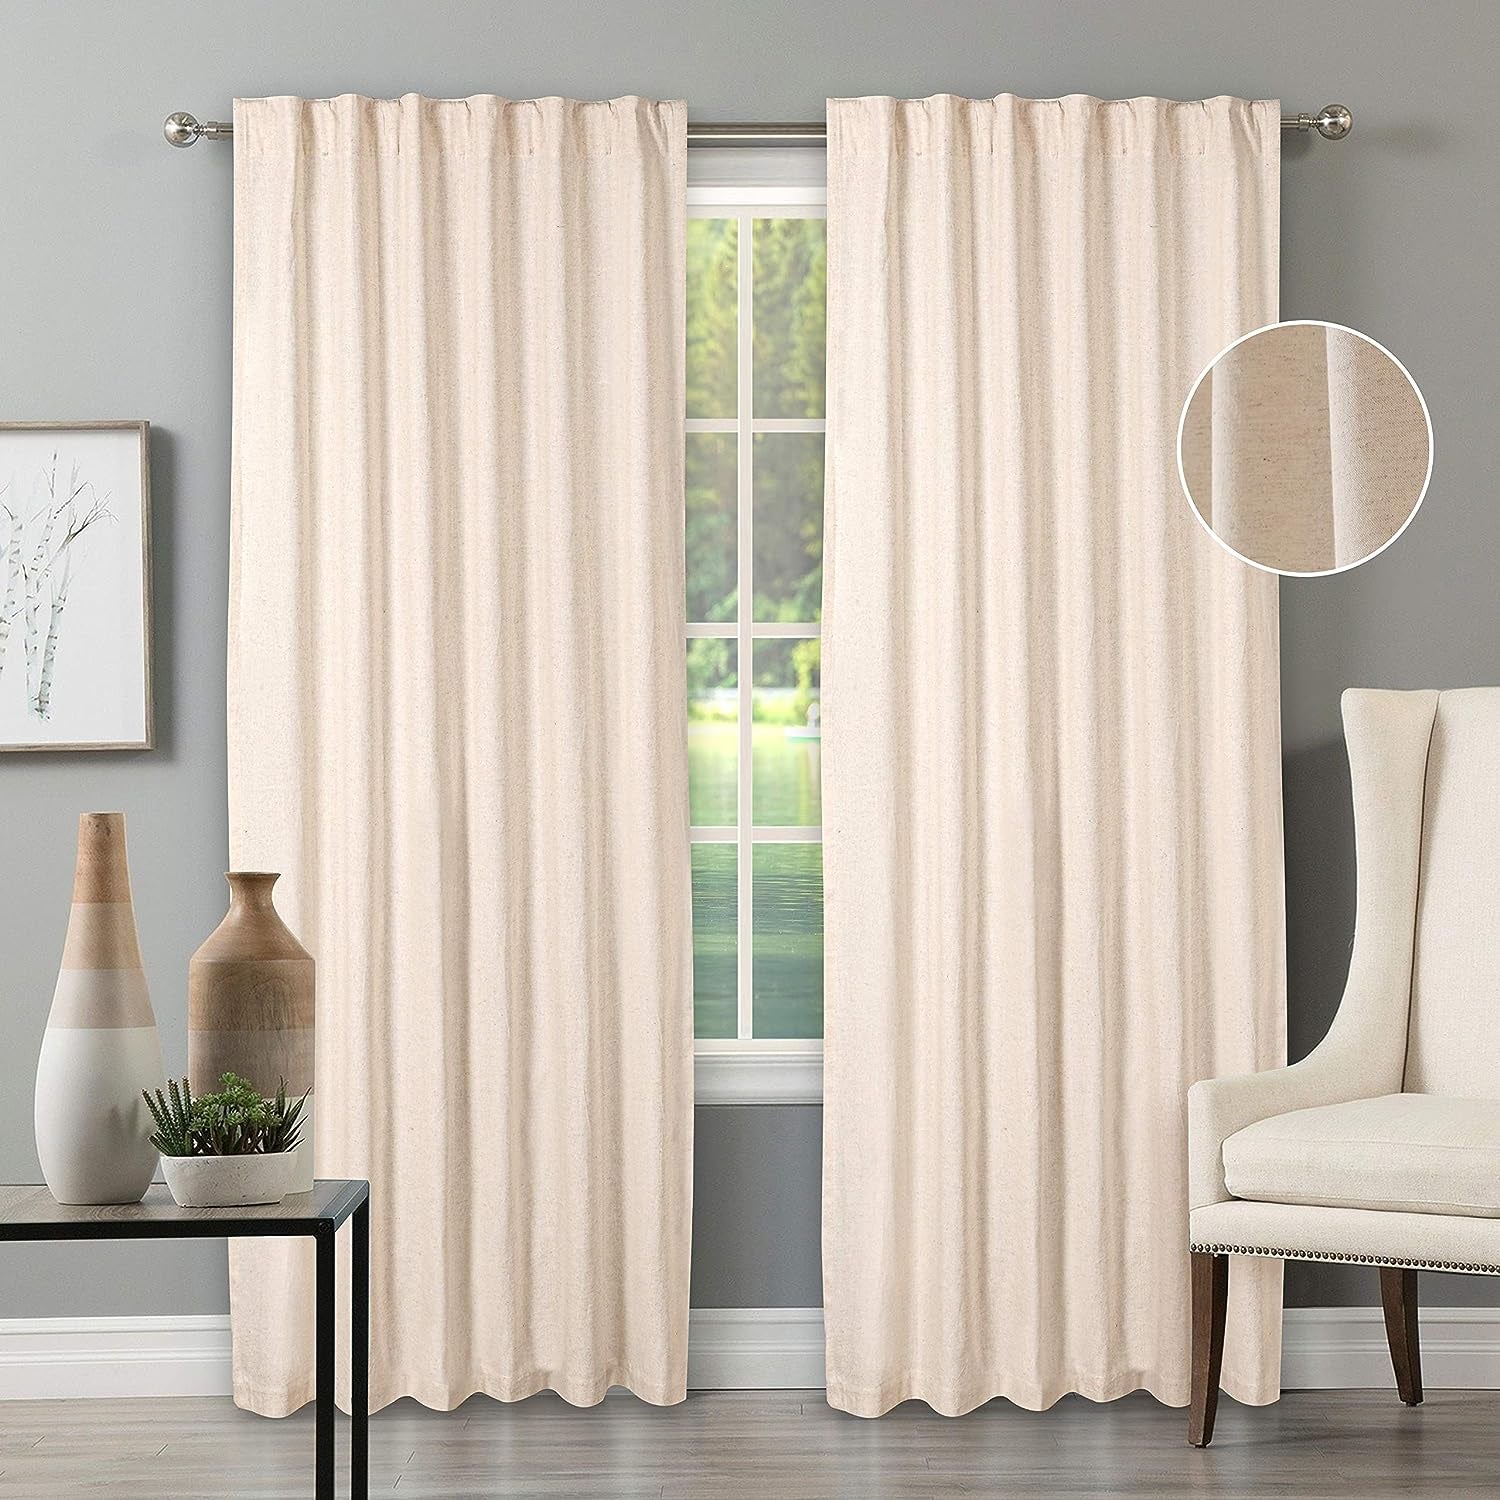 A&A Fabrics Farmhouse Curtains Tab Top Curtains Room Darkening Drapes, Window Panels in Natural 70% Cotton 30% Linen, There Are Drapes for the Kitchen, Living Room, Bedroom 1 Pair (Set of 2)(50X108)  A&A Fabrics 50X72  